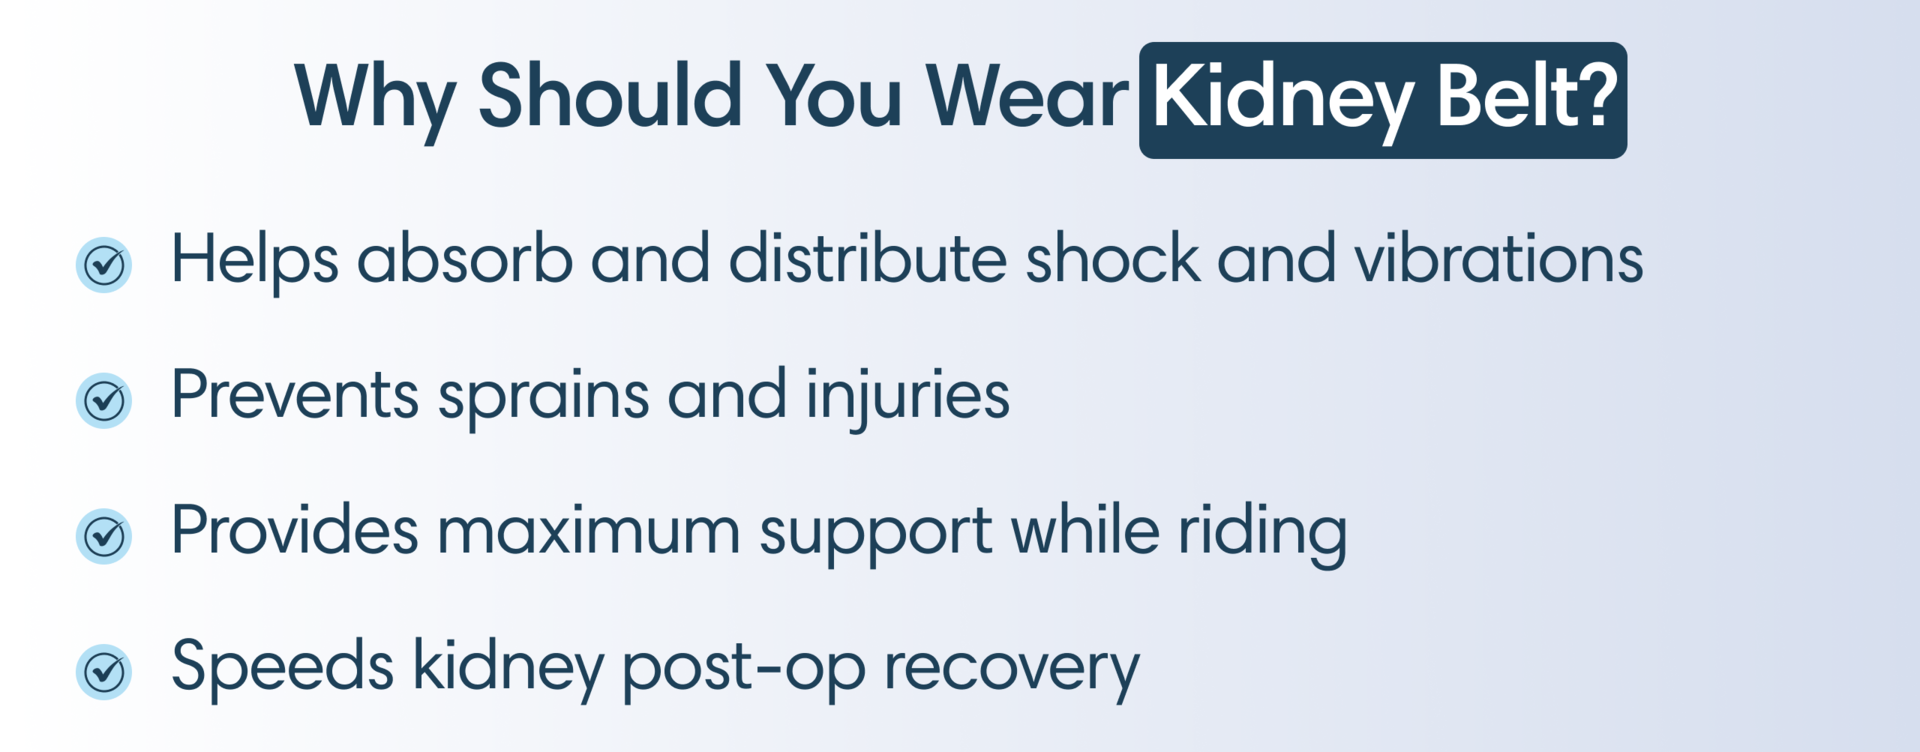 how long should you wear a kidney belt for riding 